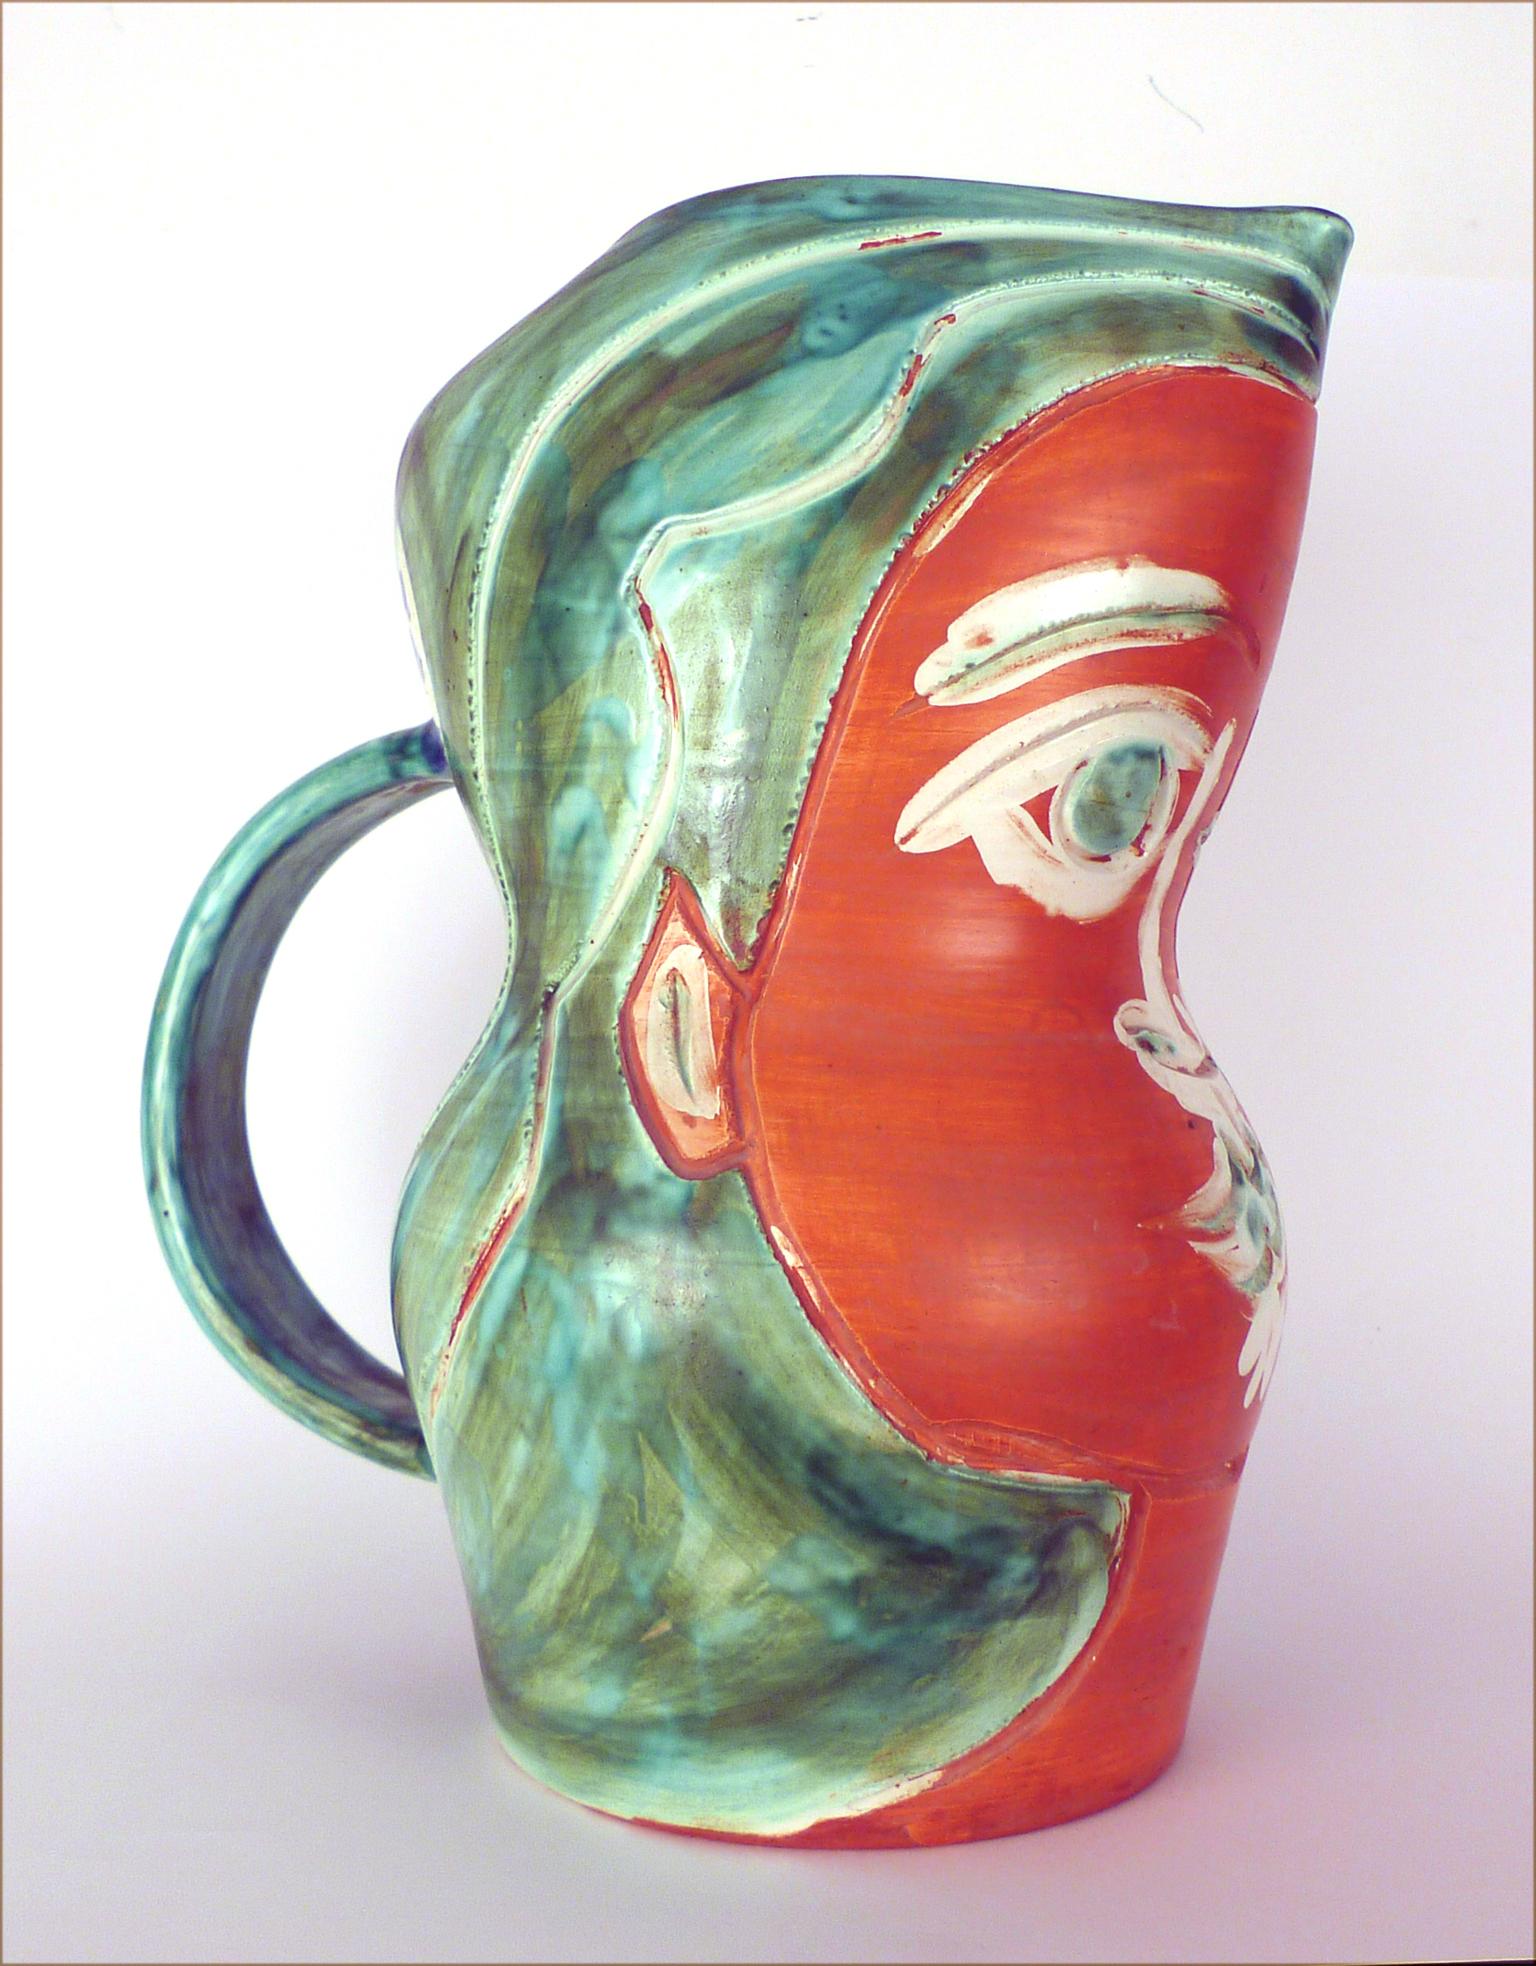 PABLO PICASSO 
Spanish, 1881-1973
VISAGE DE FEMME (A.R. 192)
stamped, marked and numbered 'Edition Picasso / Madoura Plein Feu / Edition Picasso / 154/200 / Madoura' (underneath)
white earthenware ceramic pitcher, partially engraved, with coloured